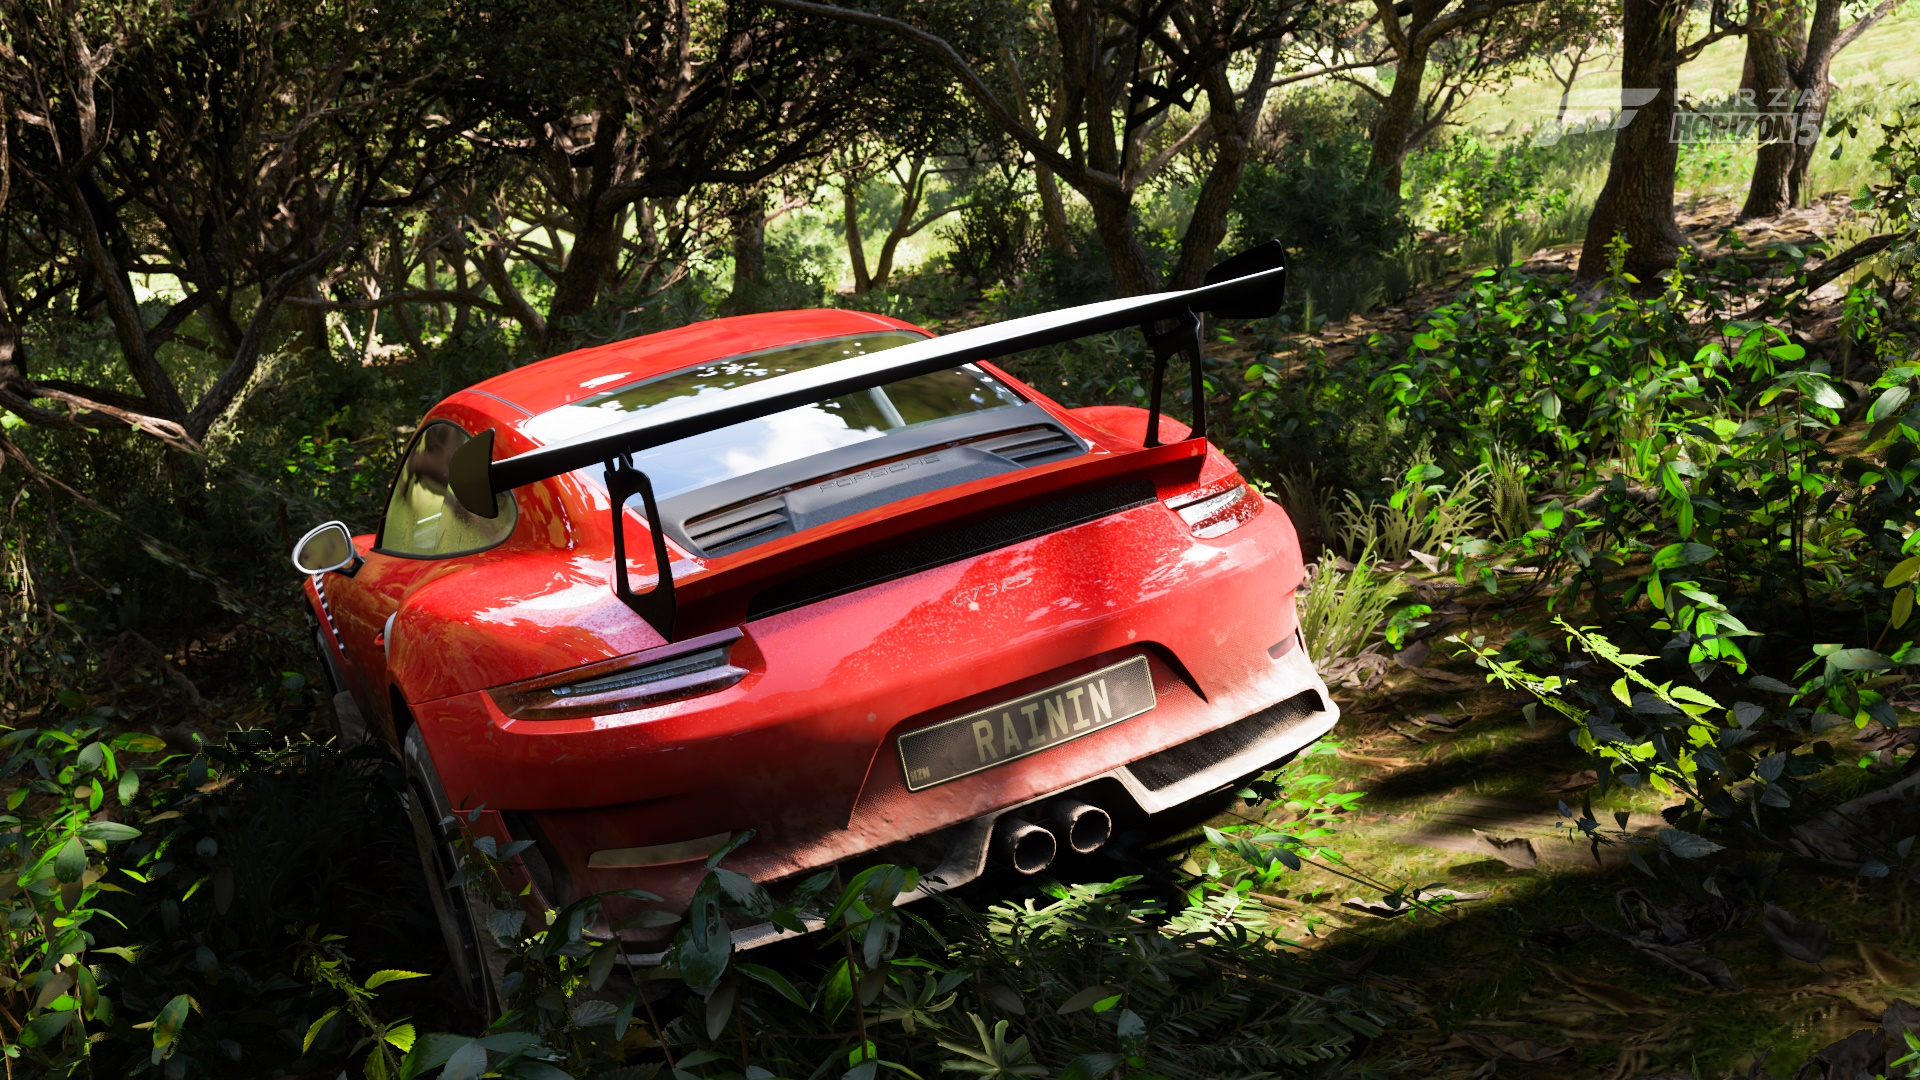 General 1920x1080 car Porsche 911 GT3 R red forest Forza Forza Horizon 5 offroad race cars modified Porsche German cars Xbox Game Studios trees red cars nature licence plates rear view vehicle Volkswagen Group PlaygroundGames sunlight watermarked taillights